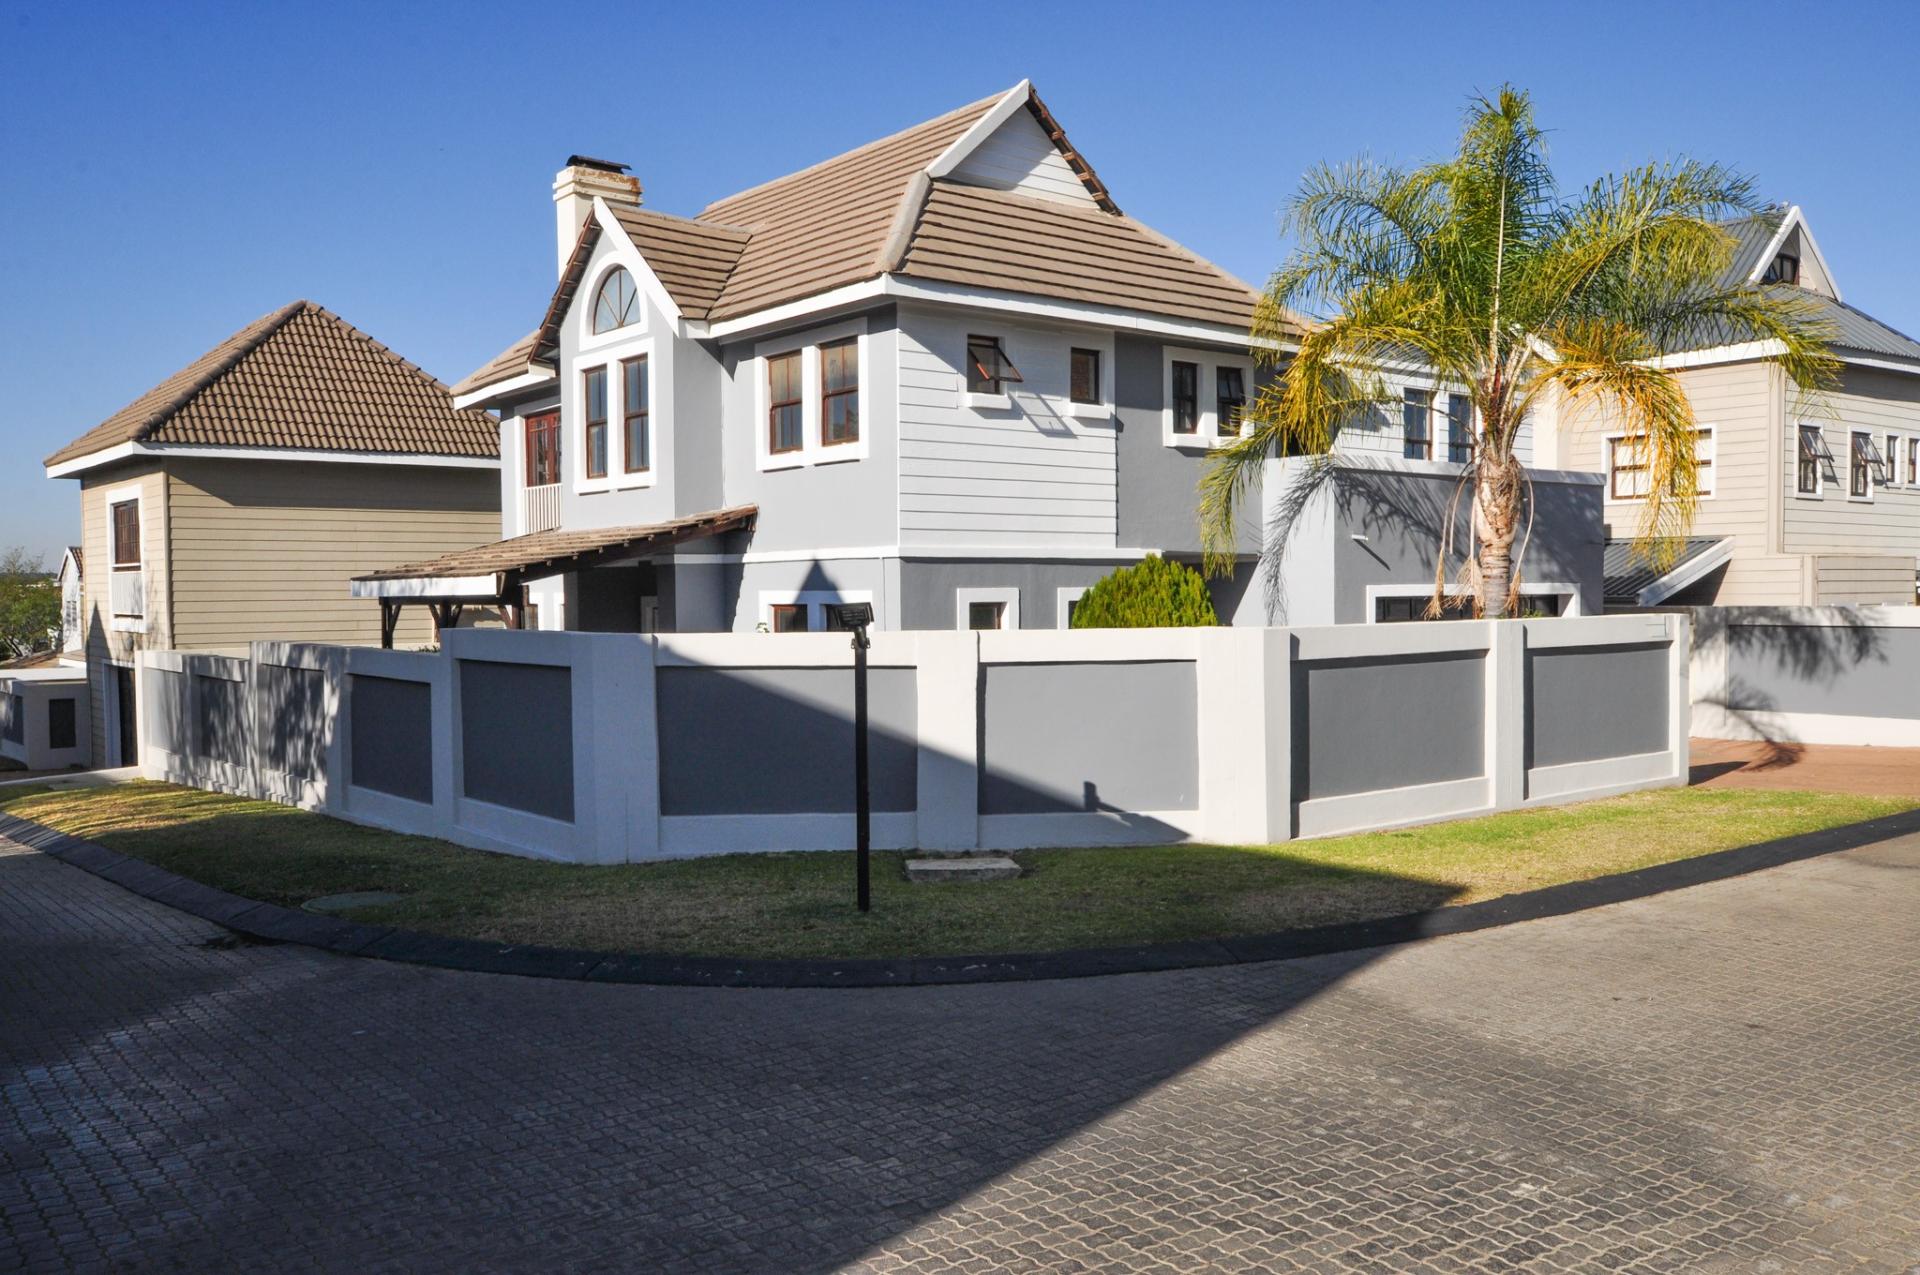 Modern & Stylish 4 Bedroom Cluster House For Rent in Broadacres